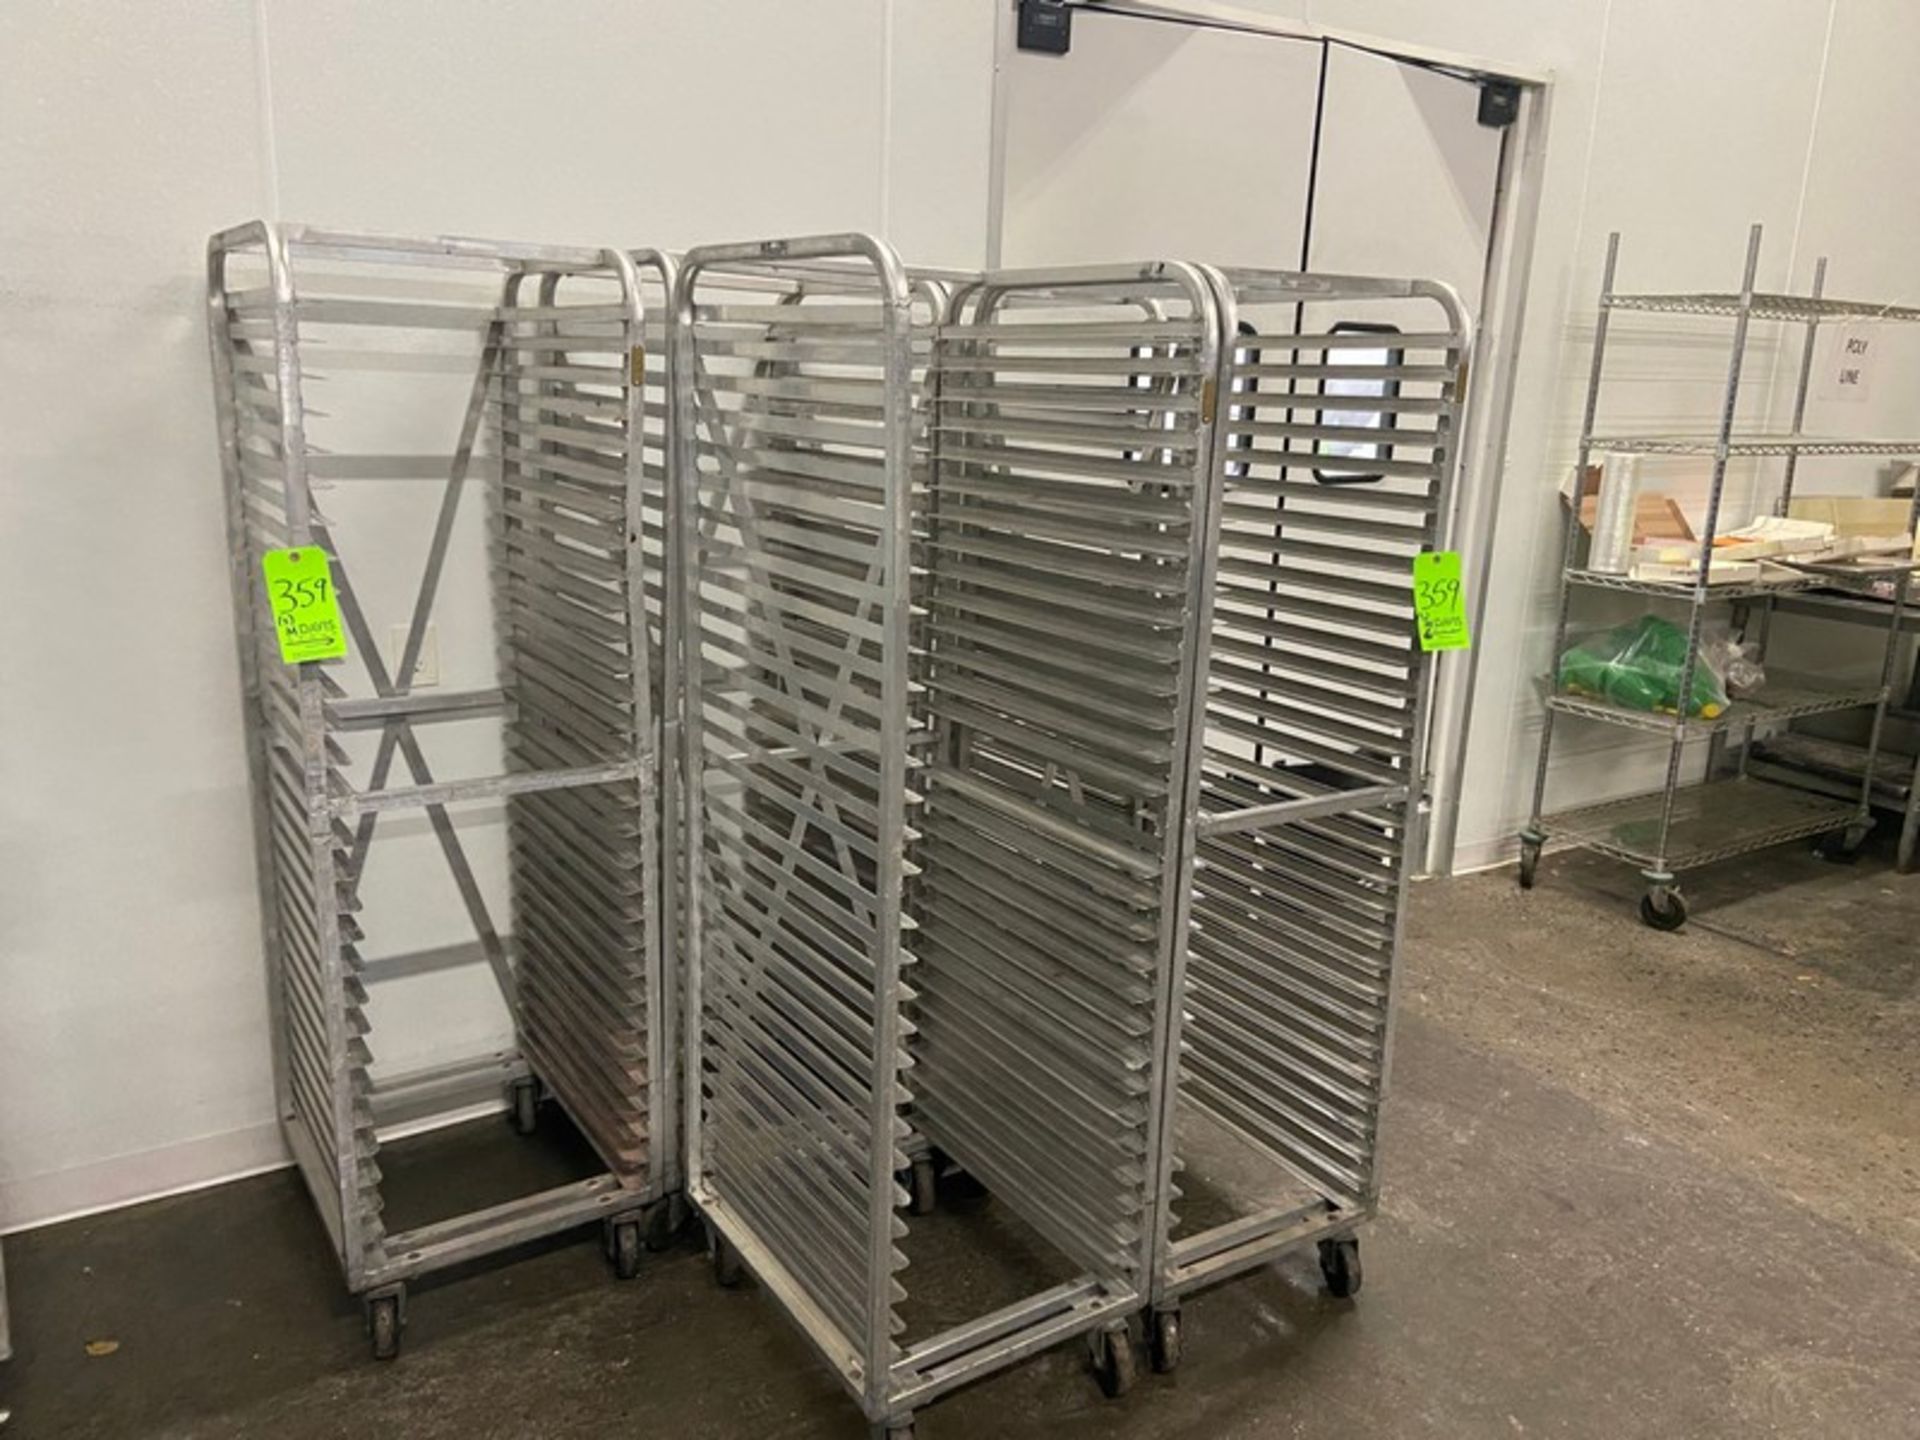 (5) ALUMINUM BAKERY RACKS, MOUNTED ON CASTERS (LOCATED IN CALLERY, PA)